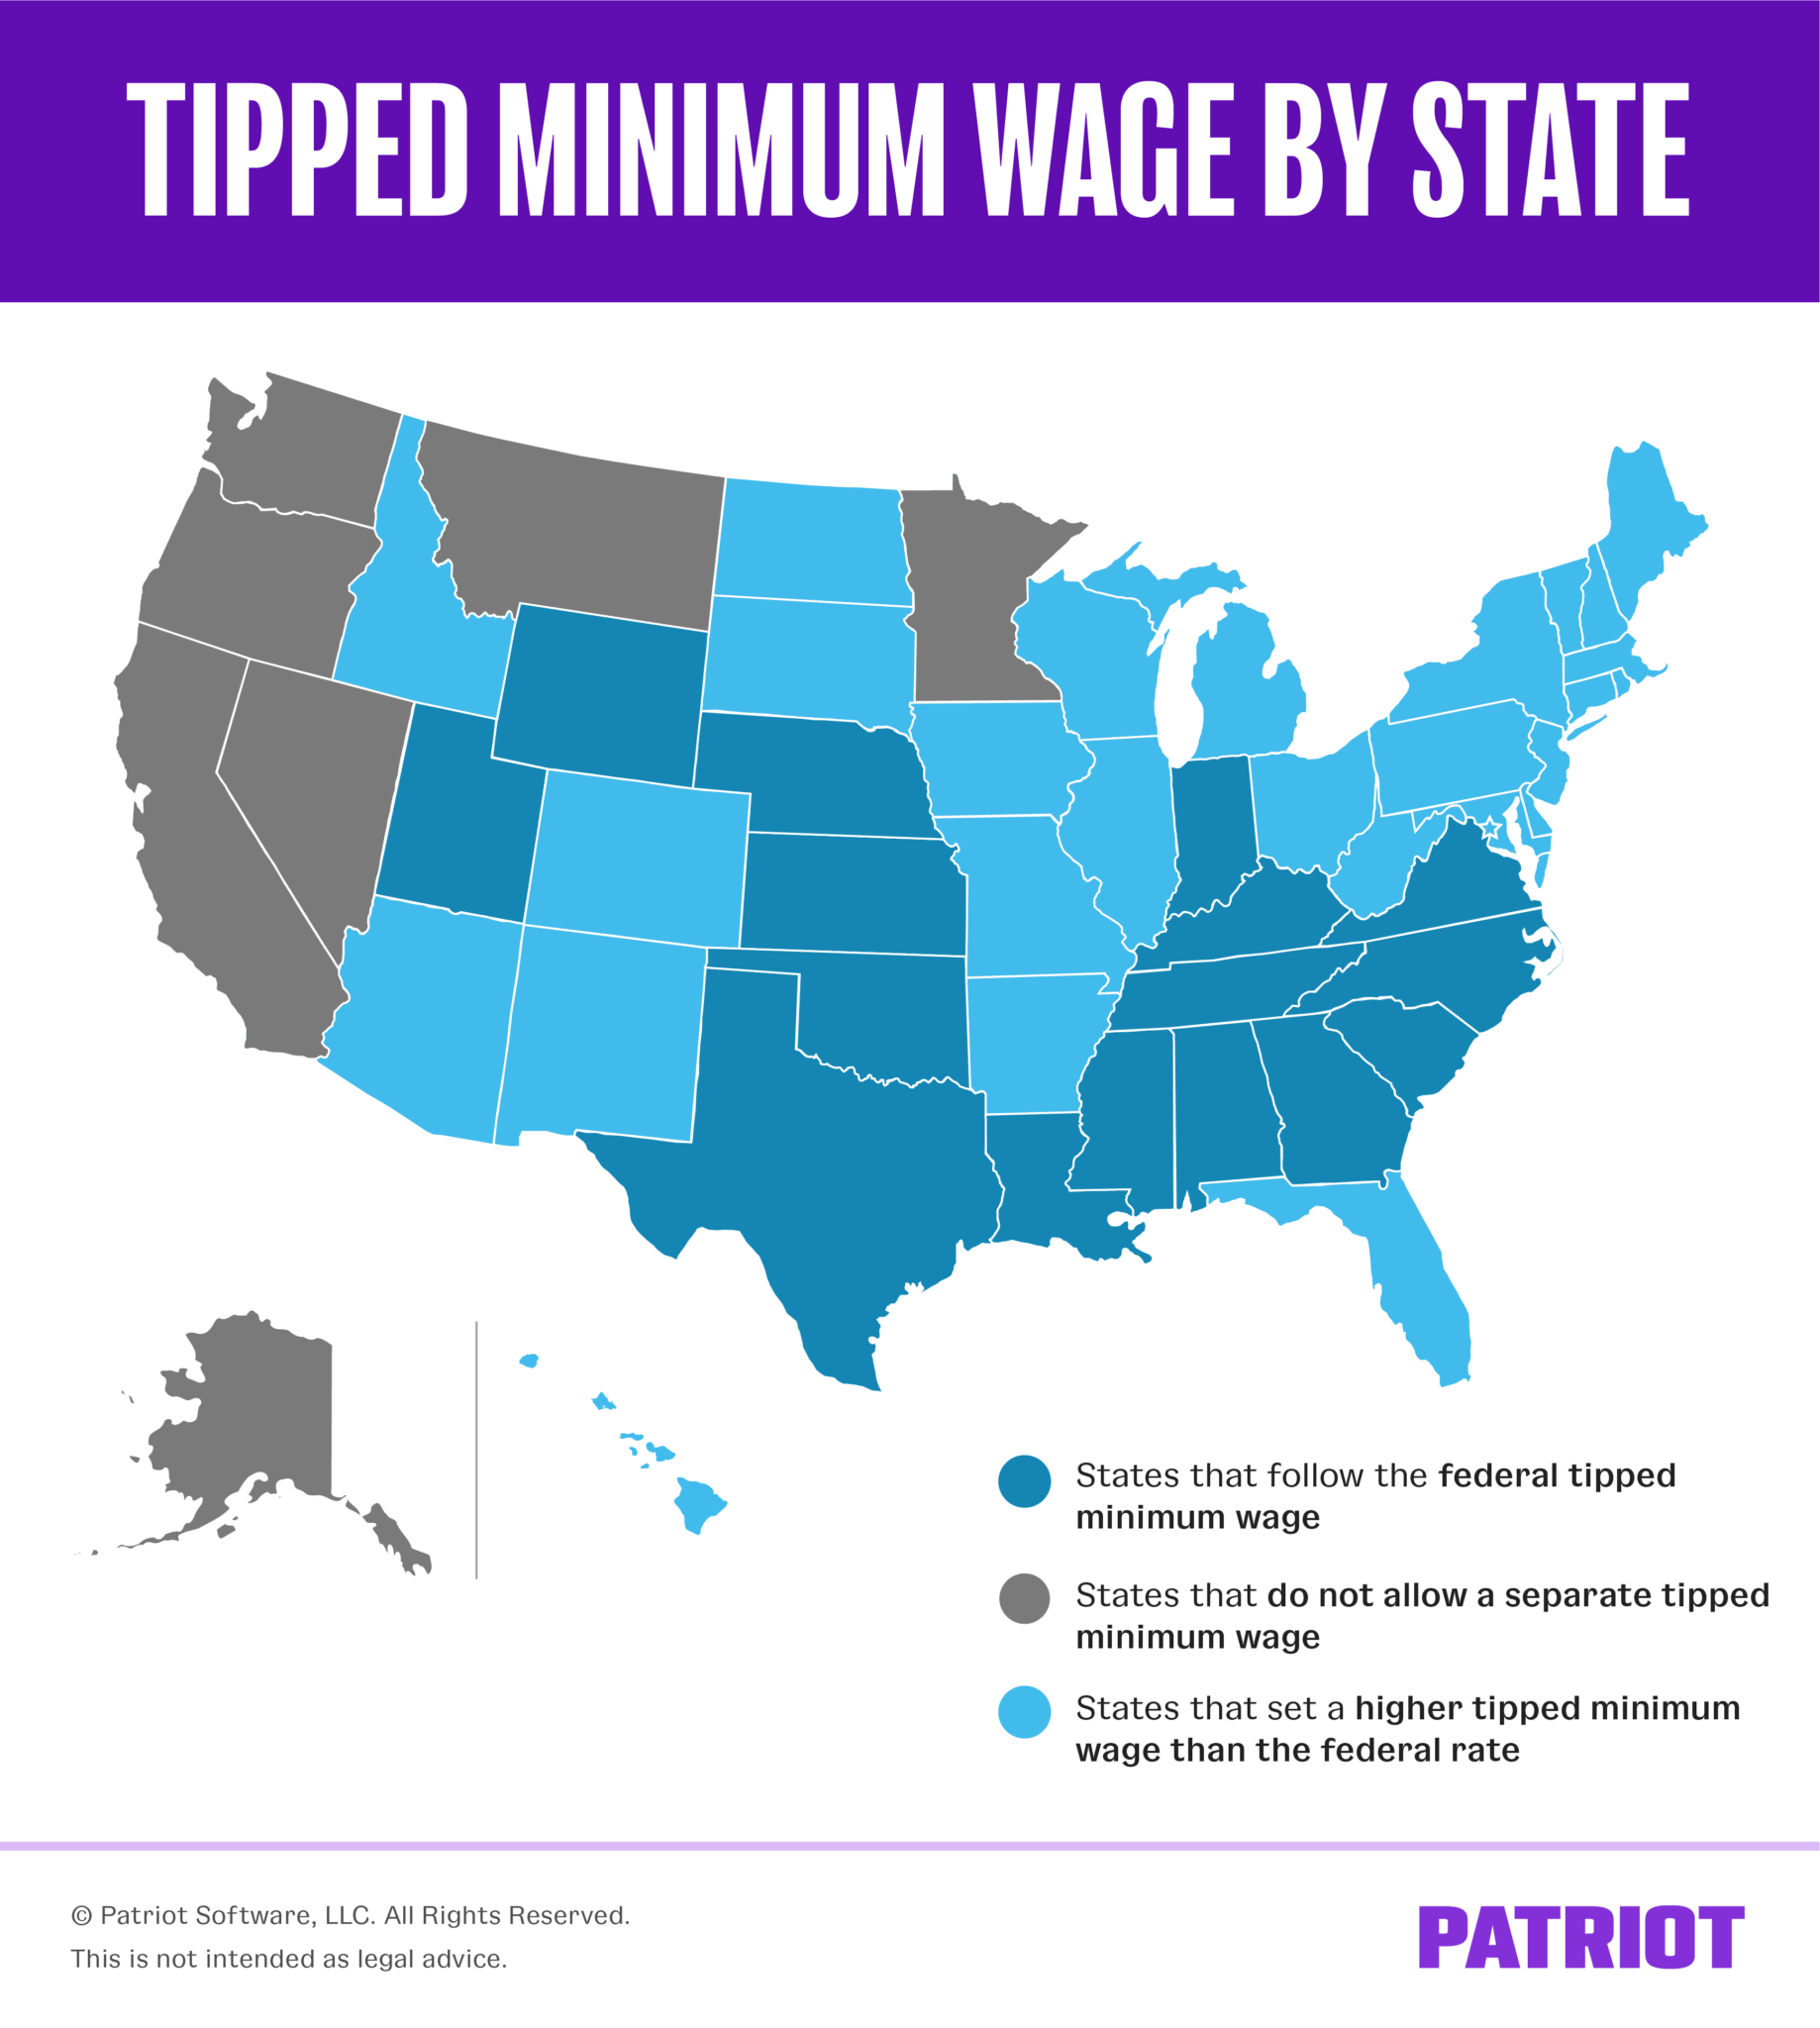 Tipped Minimal Wage Federal Fee and Charges by State (Chart)